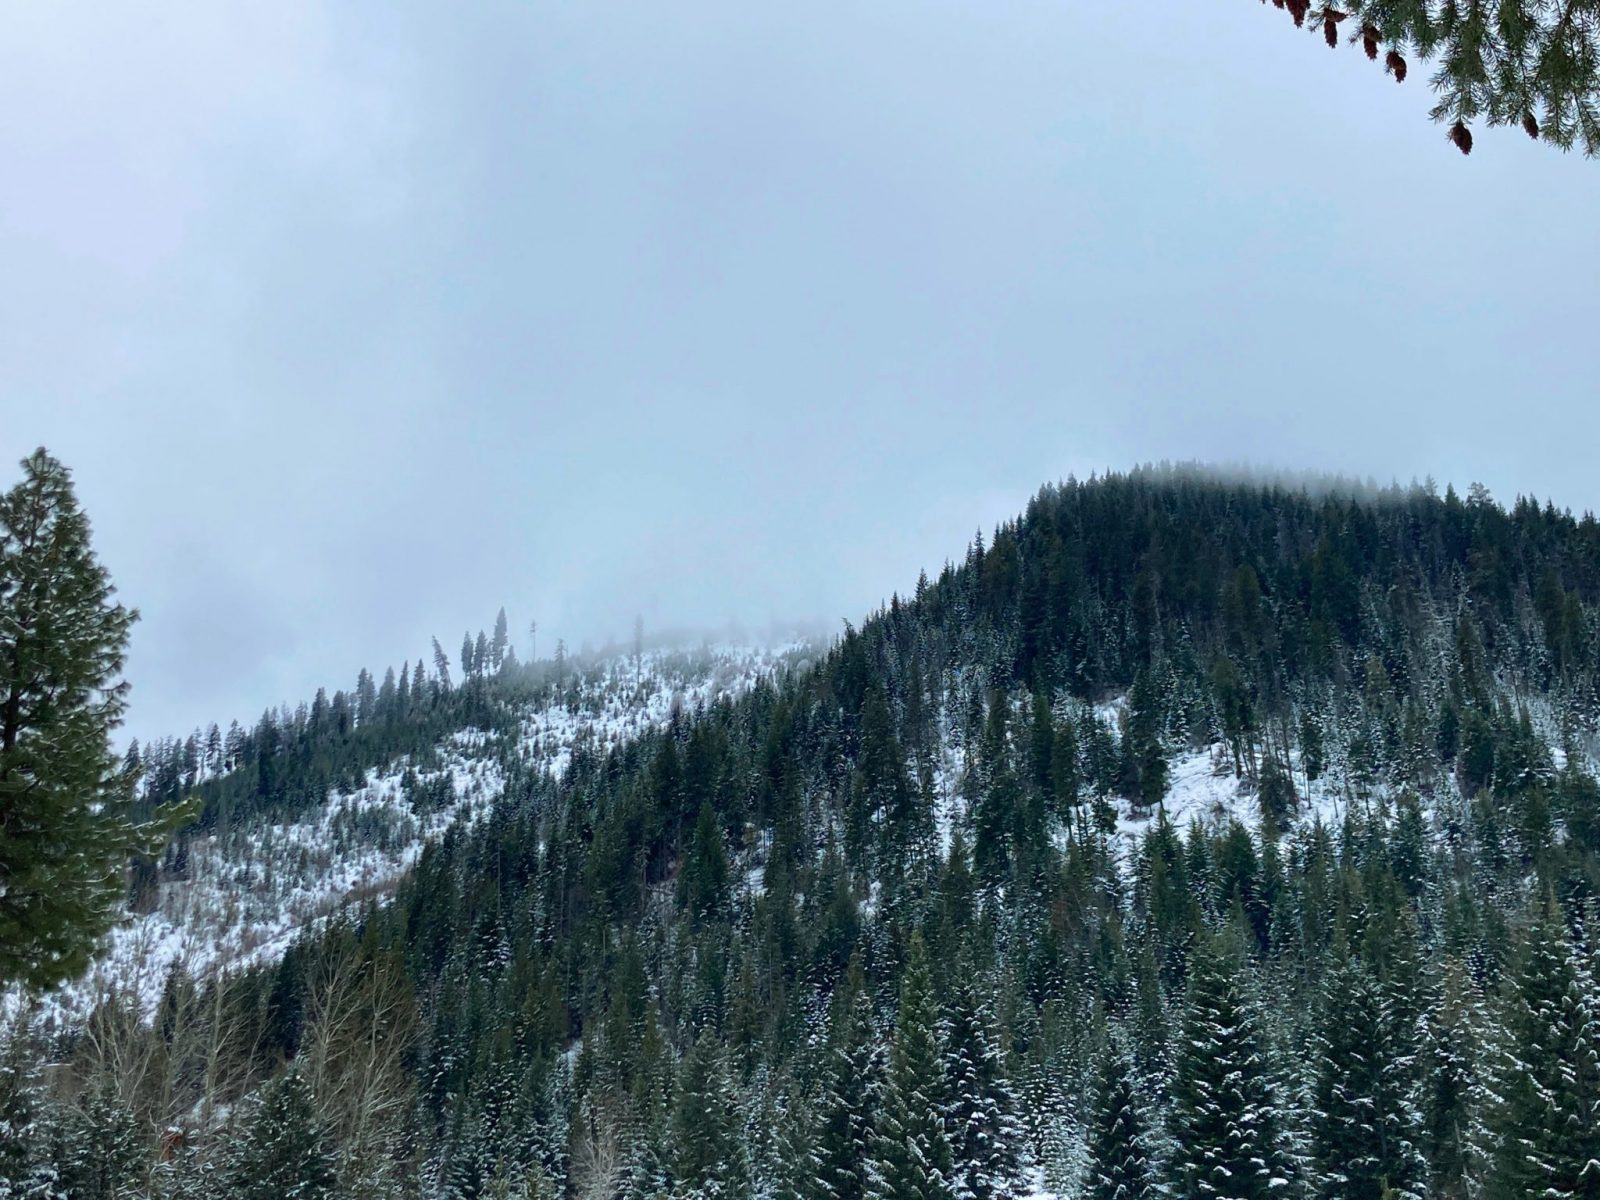 A snowy forested hillside on a foggy day